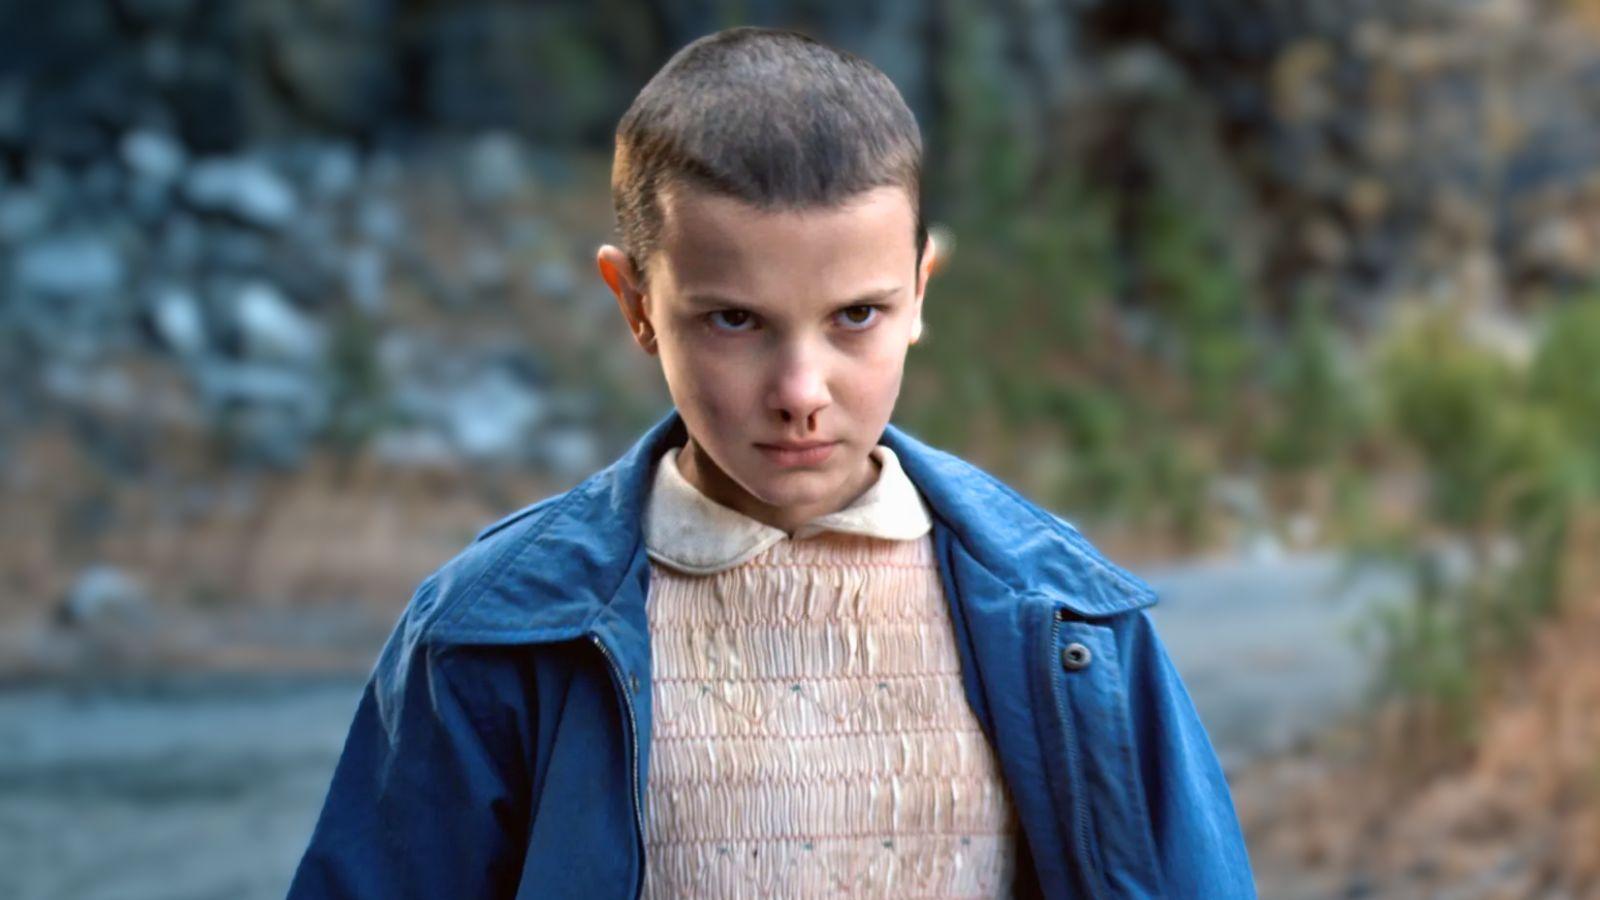 Millie Bobby Brown as Eleven in Stranger Things Season 1. She stands in woodland area, staring intensely with a nose bleed while preparing to use her powers.